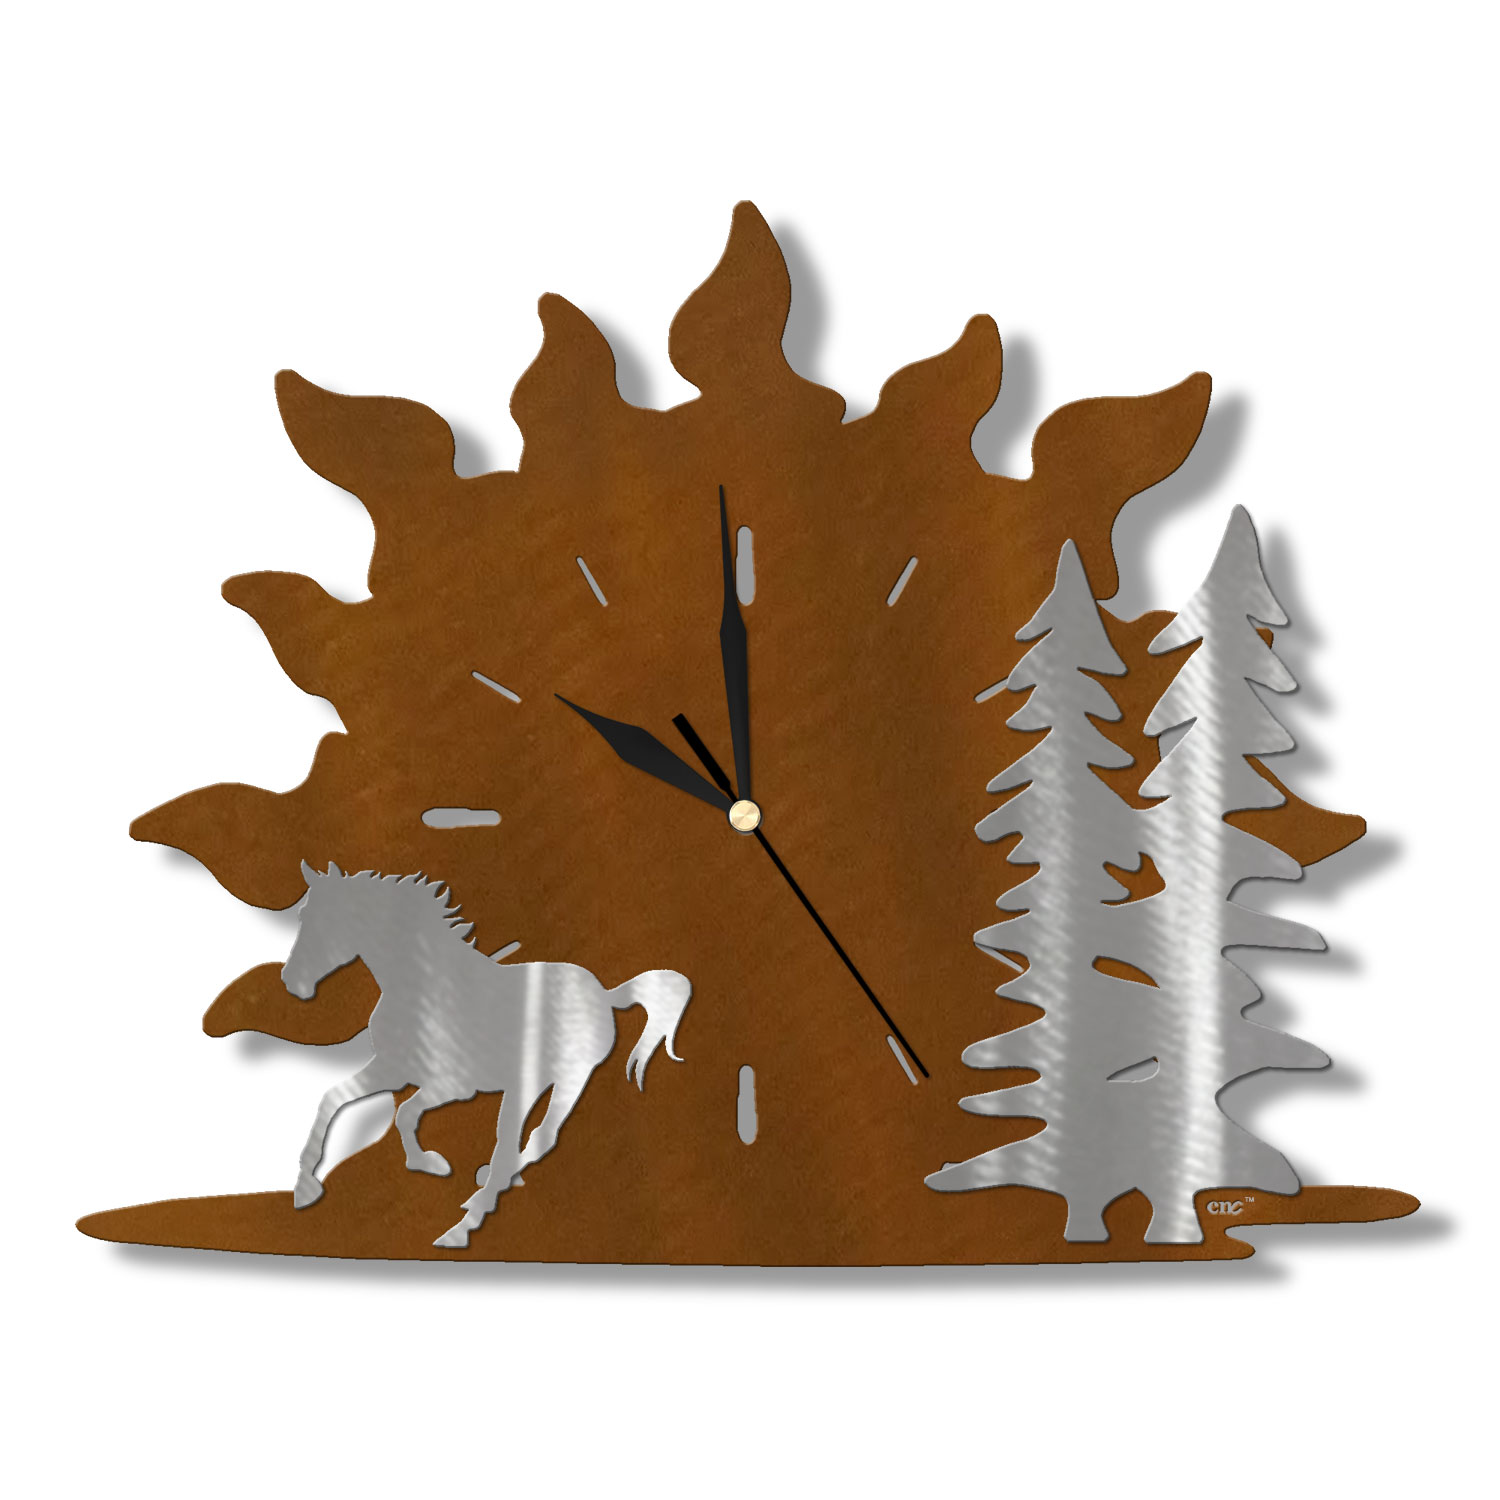 604020 - Sunrise 15in Wall Clock - Horse and Trees - Choose Color